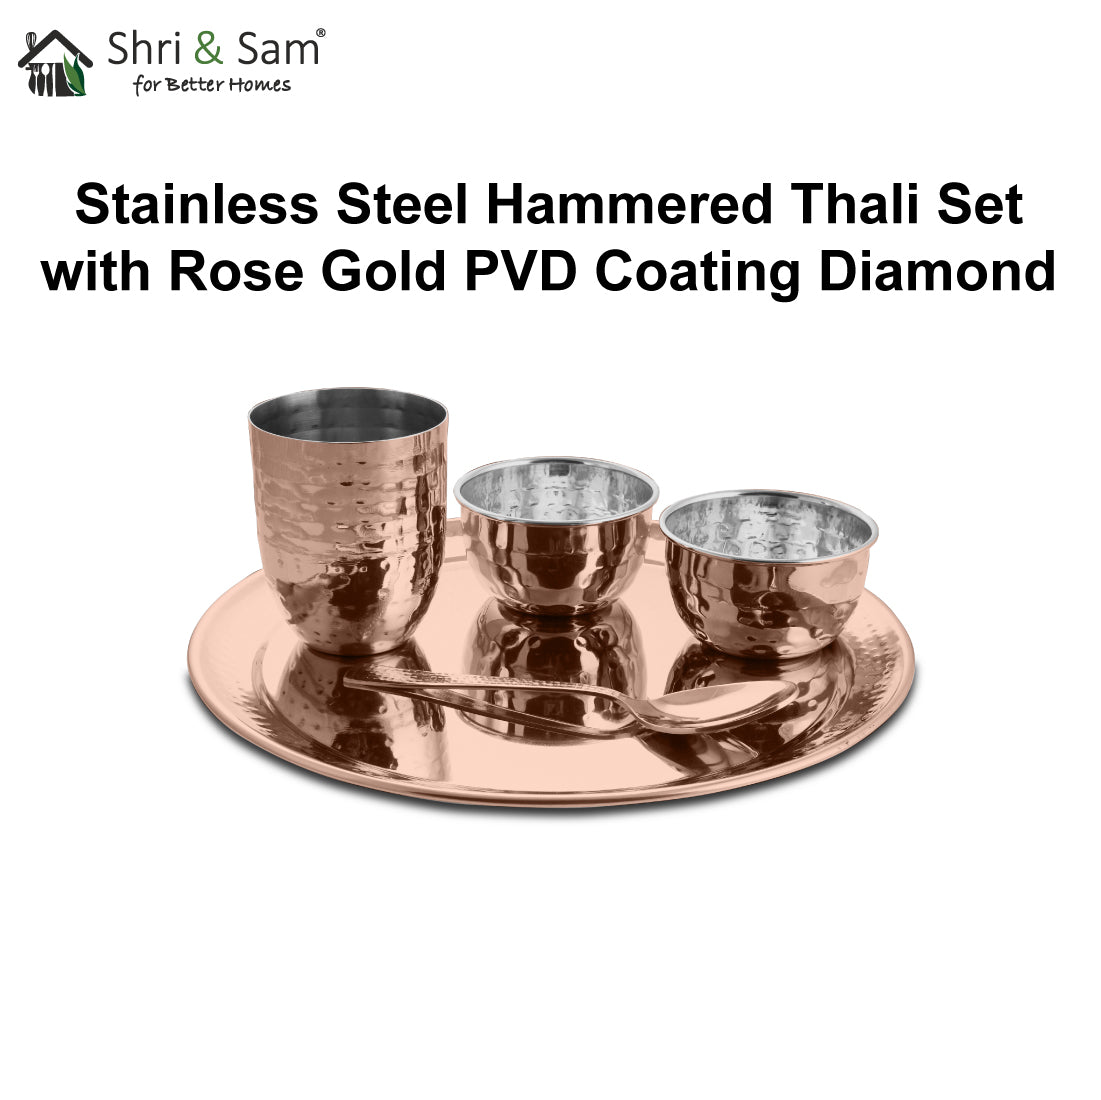 Stainless Steel Hammered Thali Set with Rose Gold PVD Coating Diamond